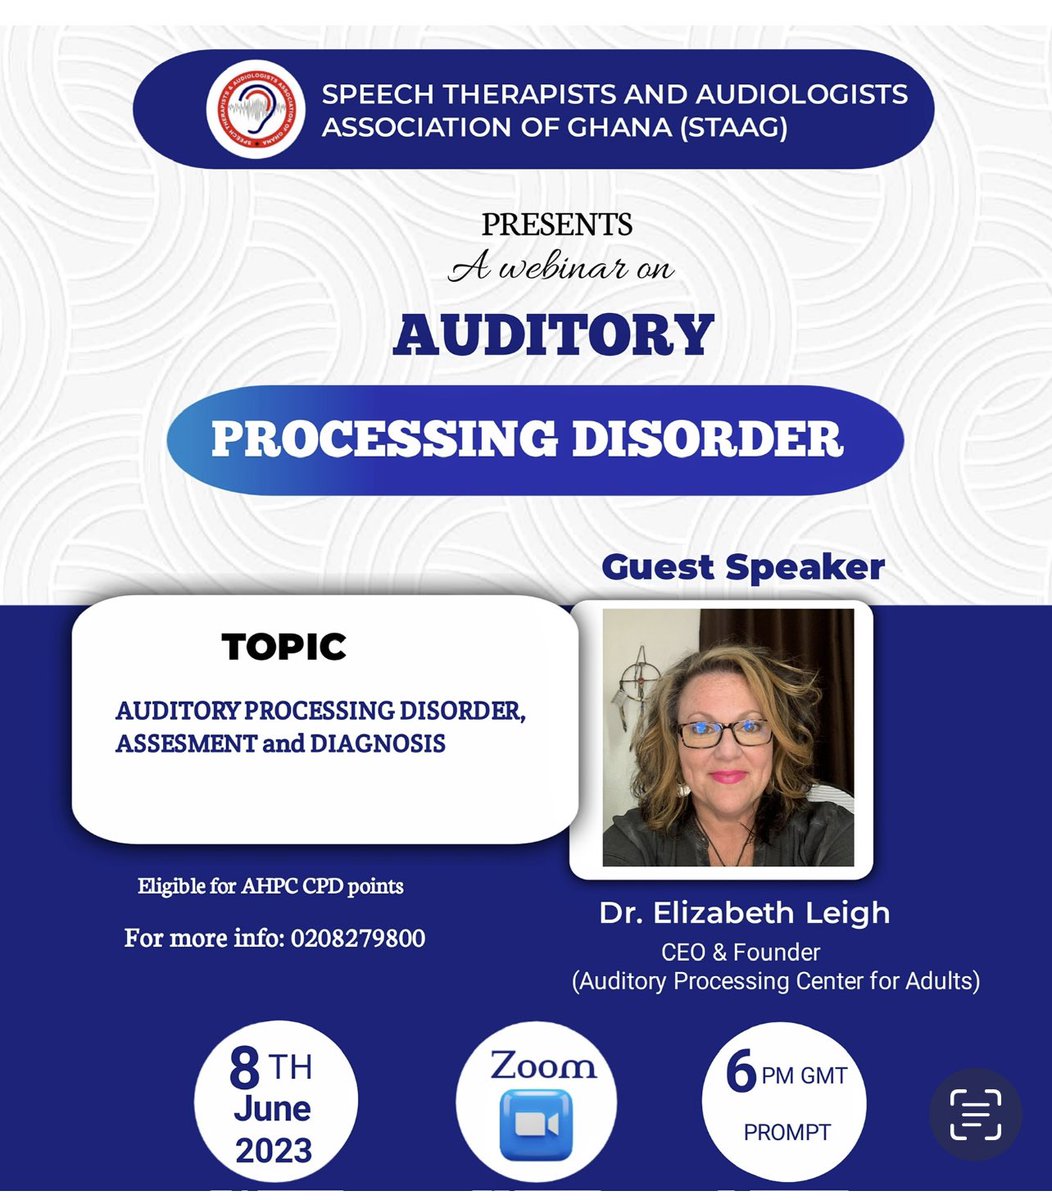 You can’t miss this……Auditory processing disorder..all we need to know….#auditoryprocessingdisorder #audiology #speechlanguagetherapist